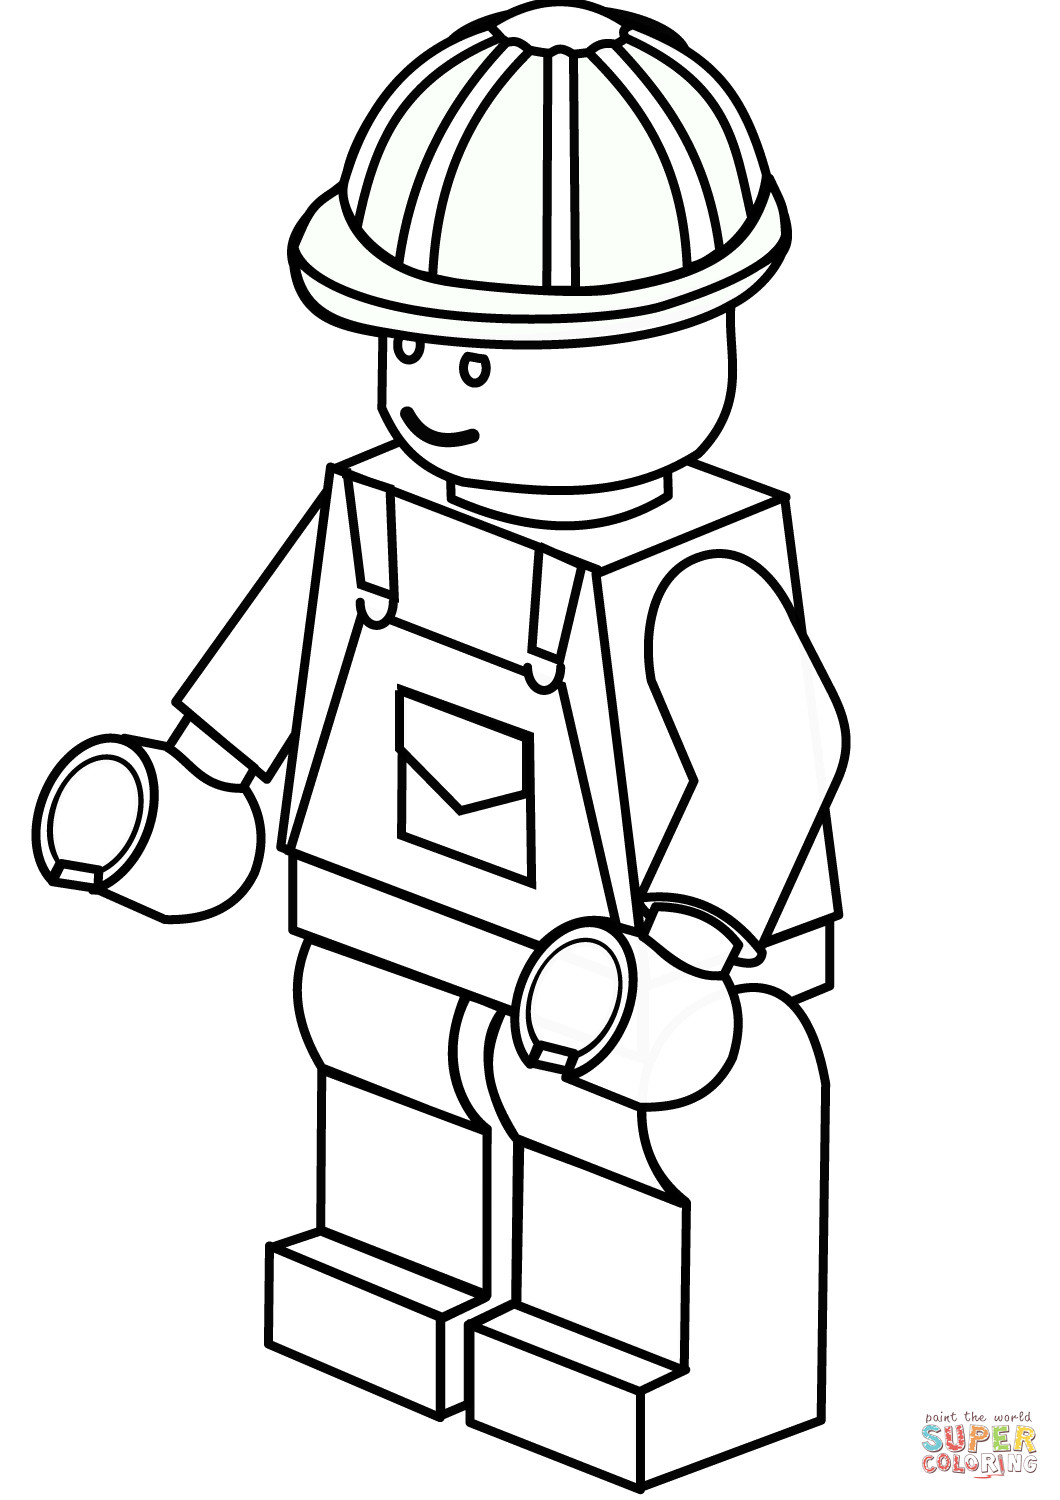 Lego Printable Coloring Pages
 Lego Construction Worker coloring page